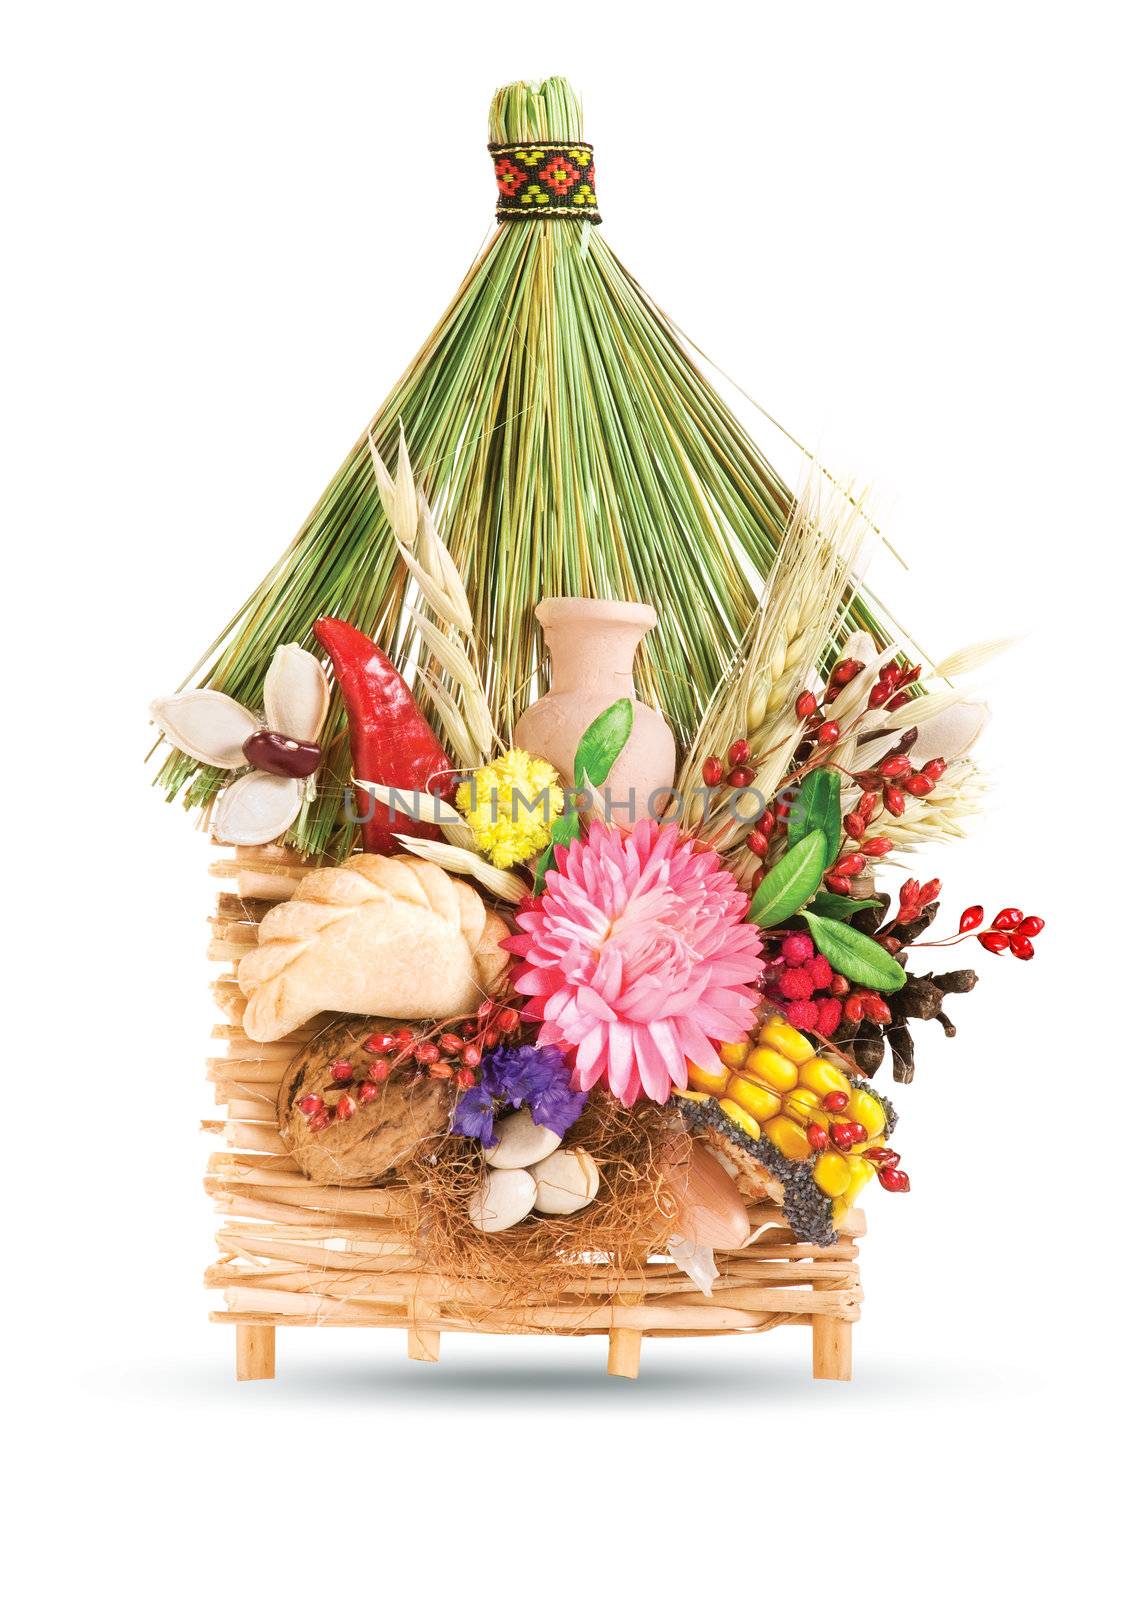 Ukrainian souvenir that made of dried materials and plants